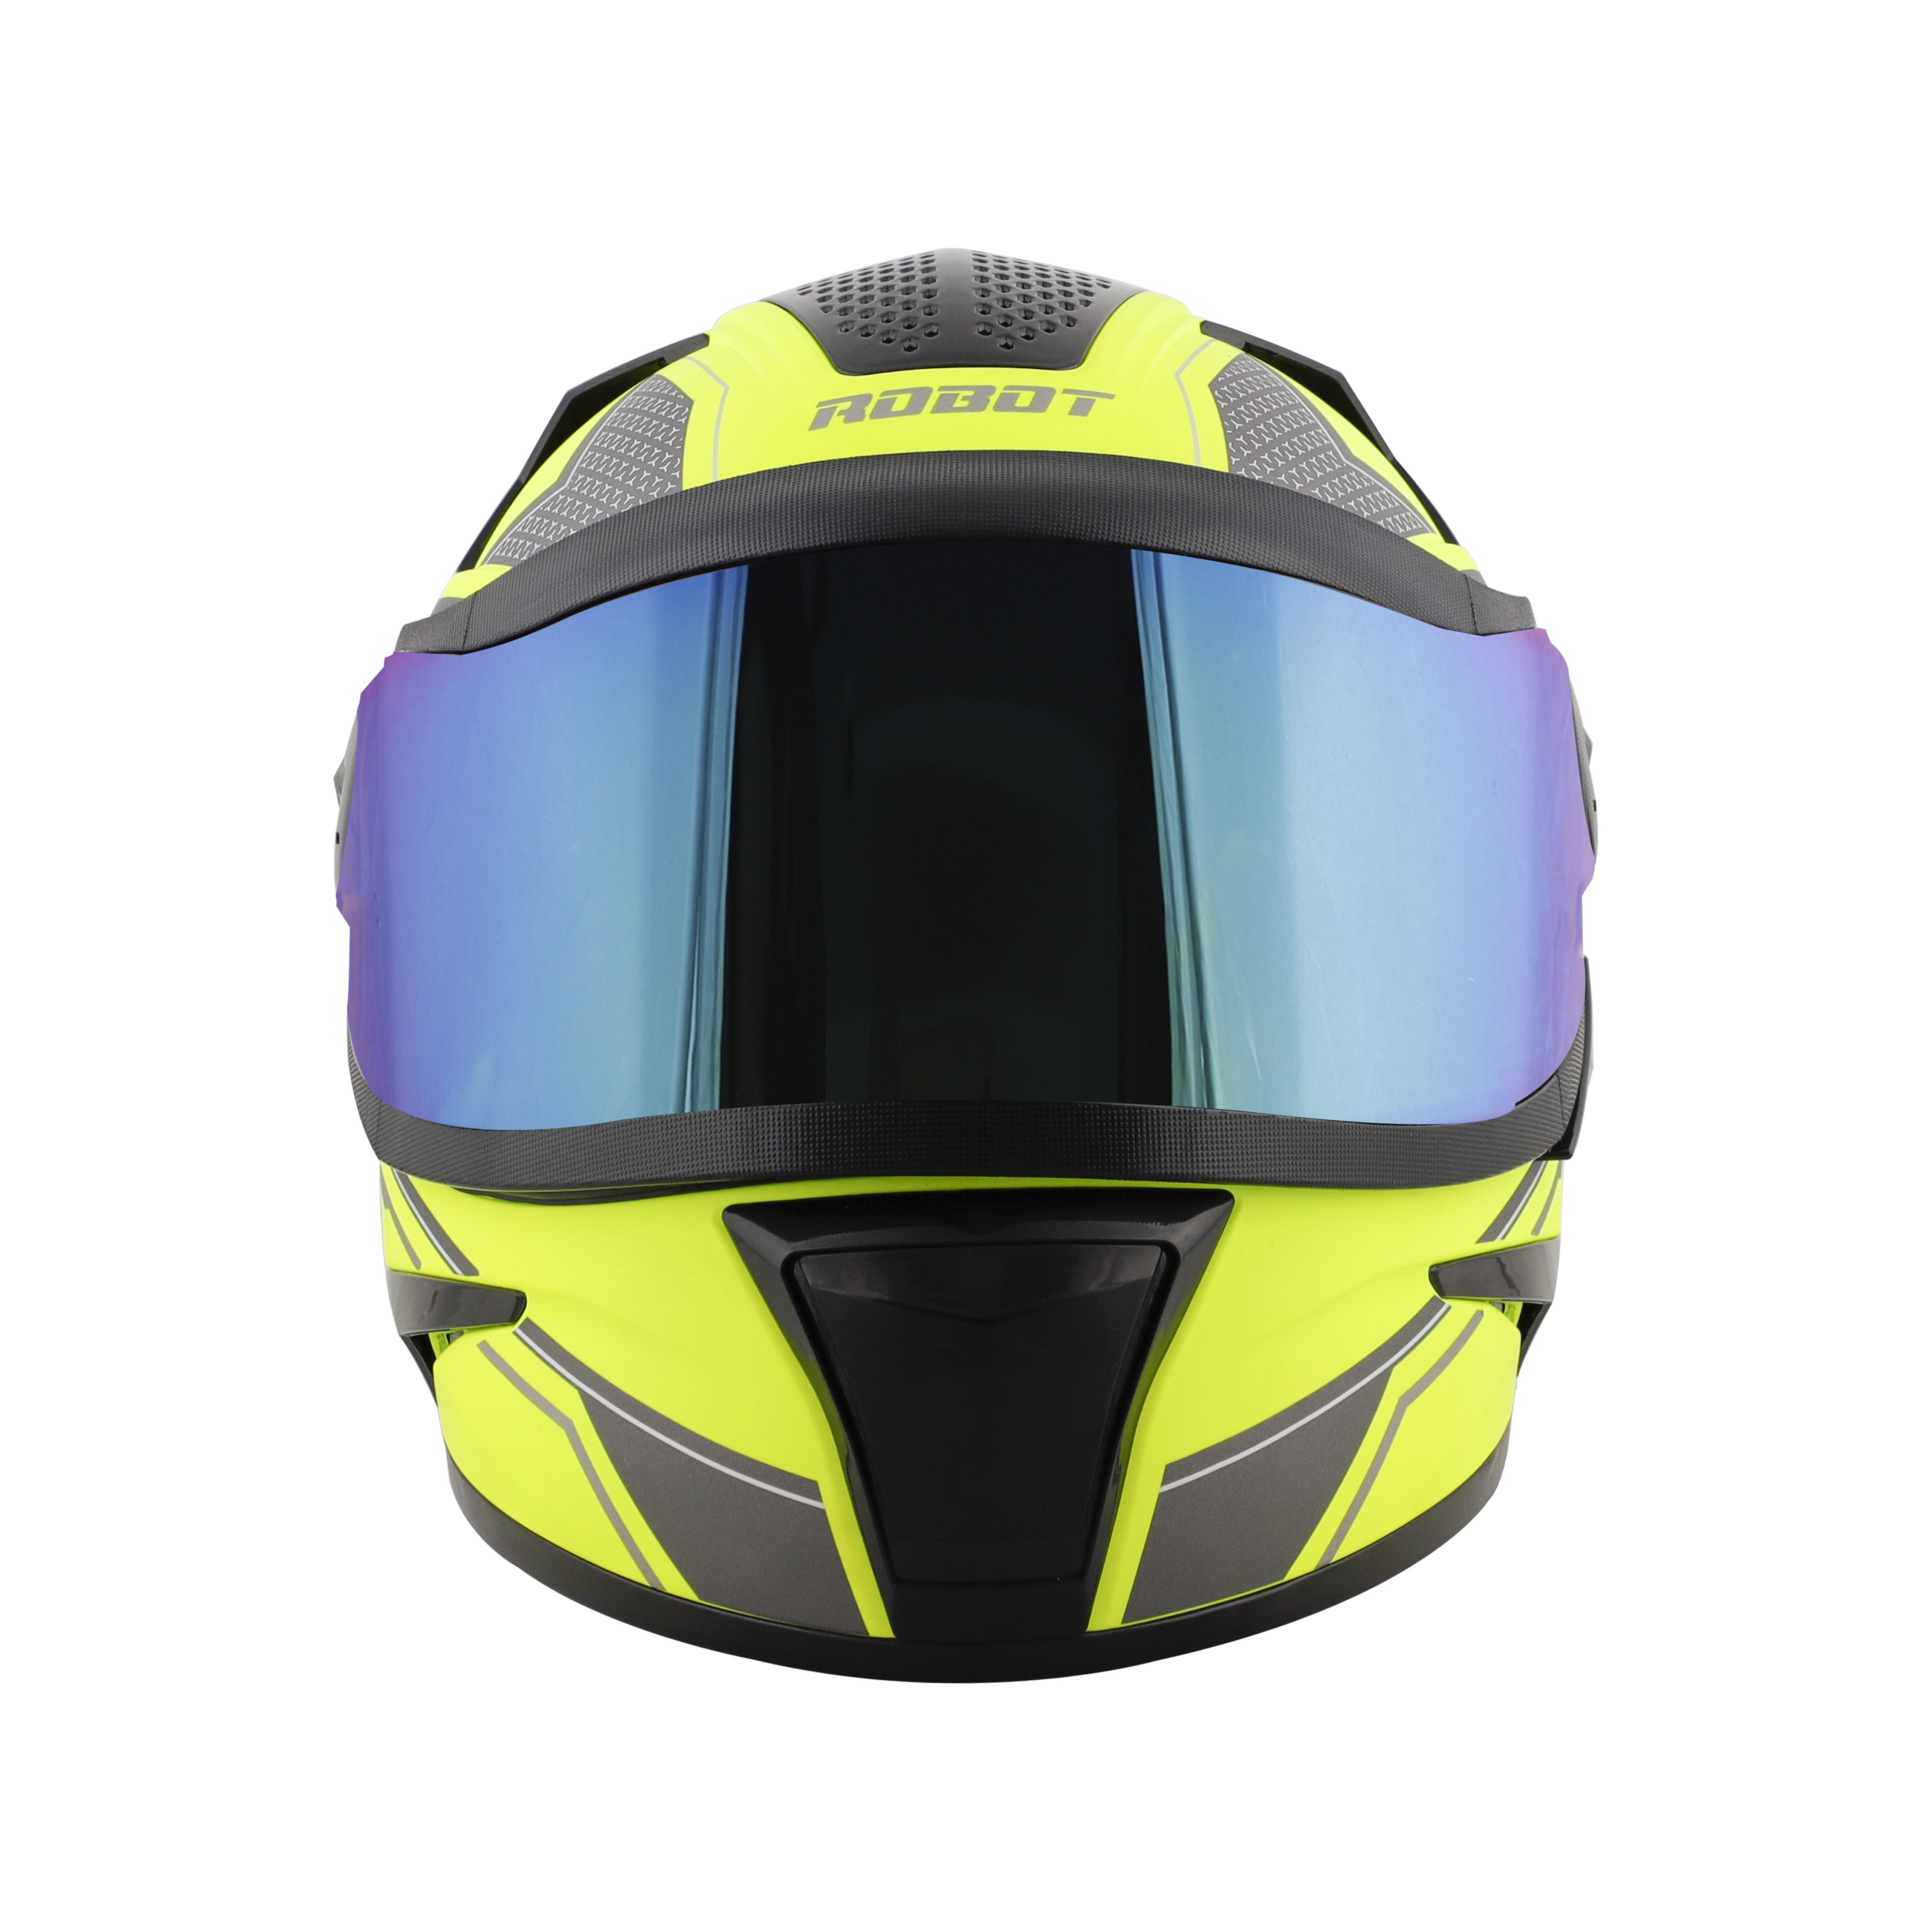 Steelbird SBH-17 Thriller ISI Certified Full Face Graphic Helmet (Glossy Fluo Neon Grey With Chrome Rainbow Visor)